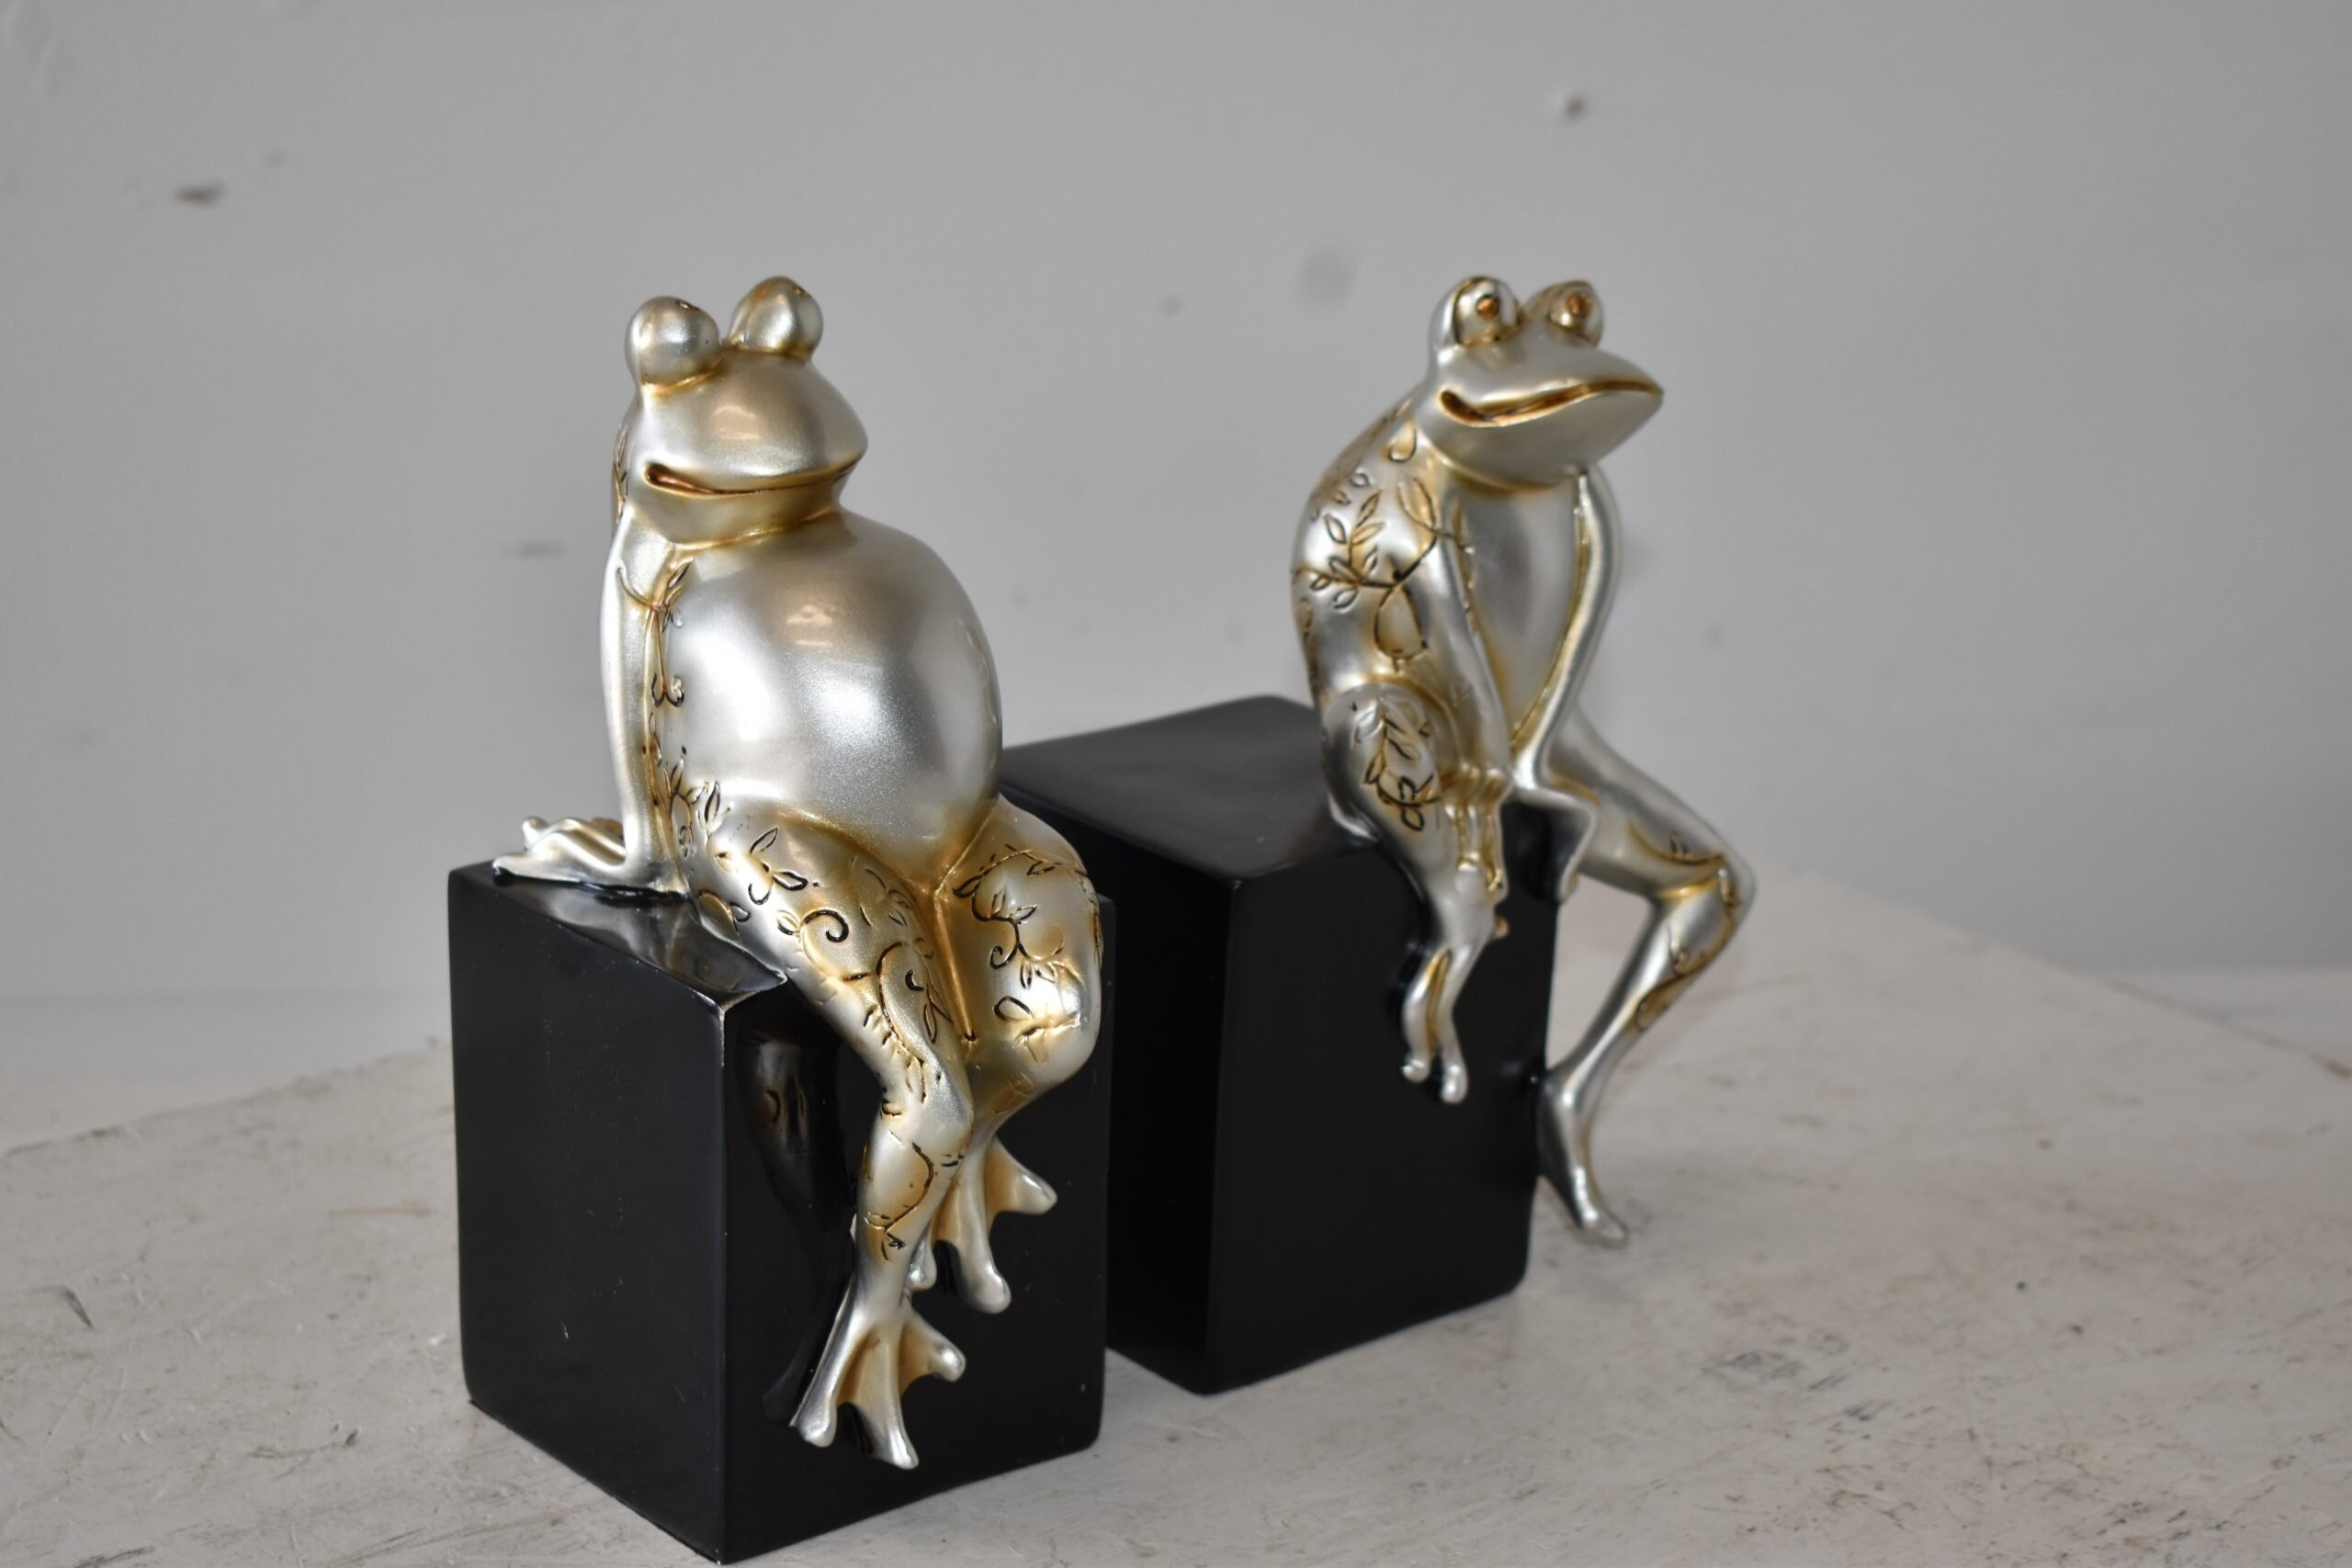 Trinx Faycelles Happy Frogs Sitting On A Cube Statue Wayfair 0783